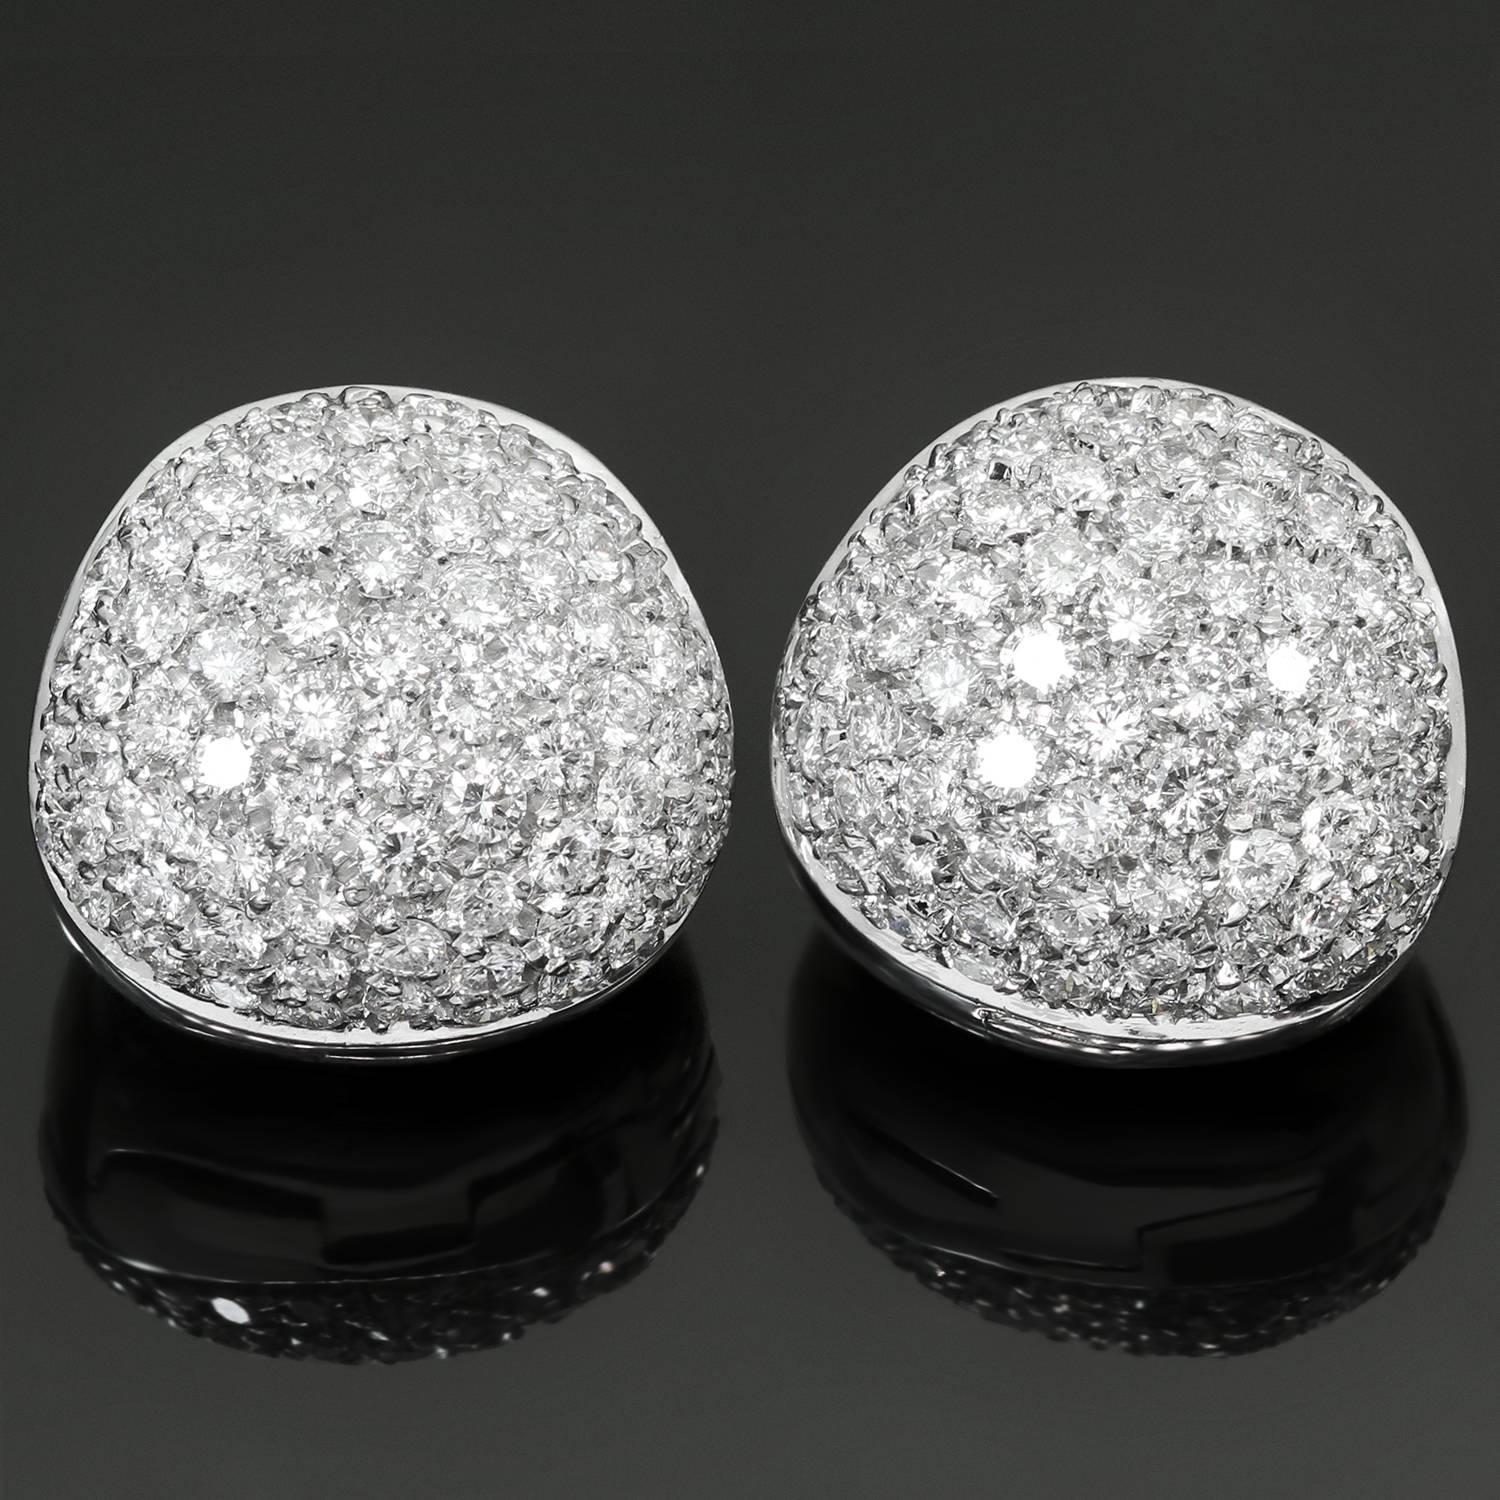 These chic Leo Pizzo huggie earrings are crafted in 18k white gold and pave-set with brilliant-cut round diamonds of an estimated 3.0 carats. Made in Italy circa 2010s. Measurements: 0.55